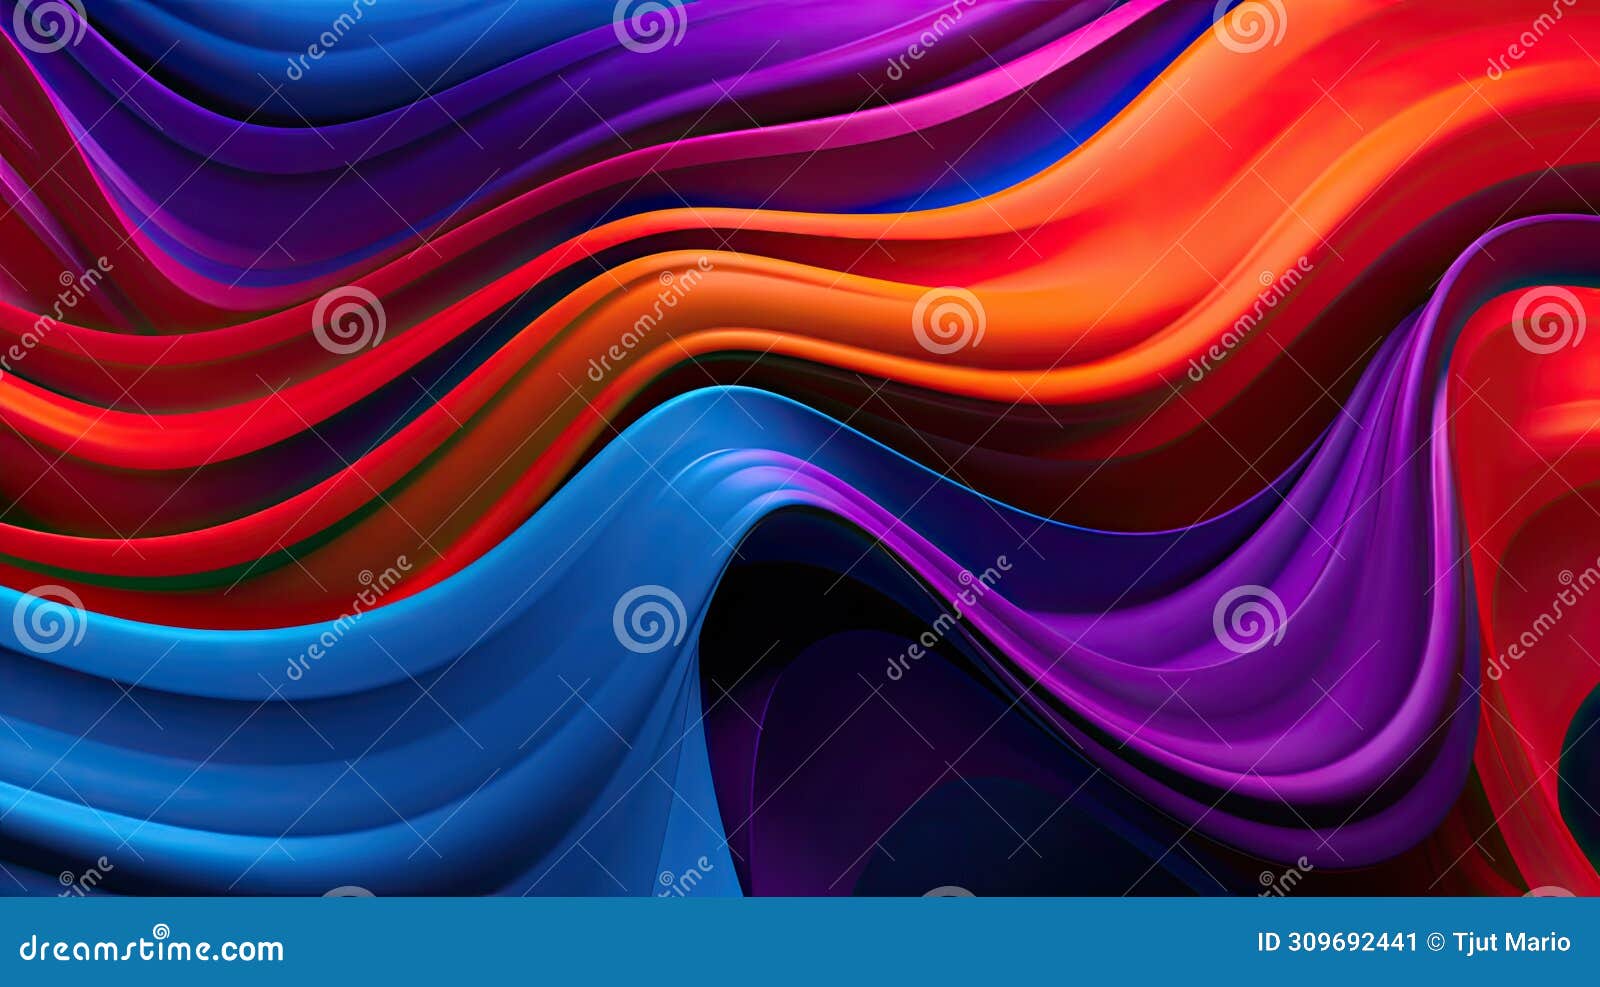 abstract amoled 3d background , a colorful journey into dimensional brilliance